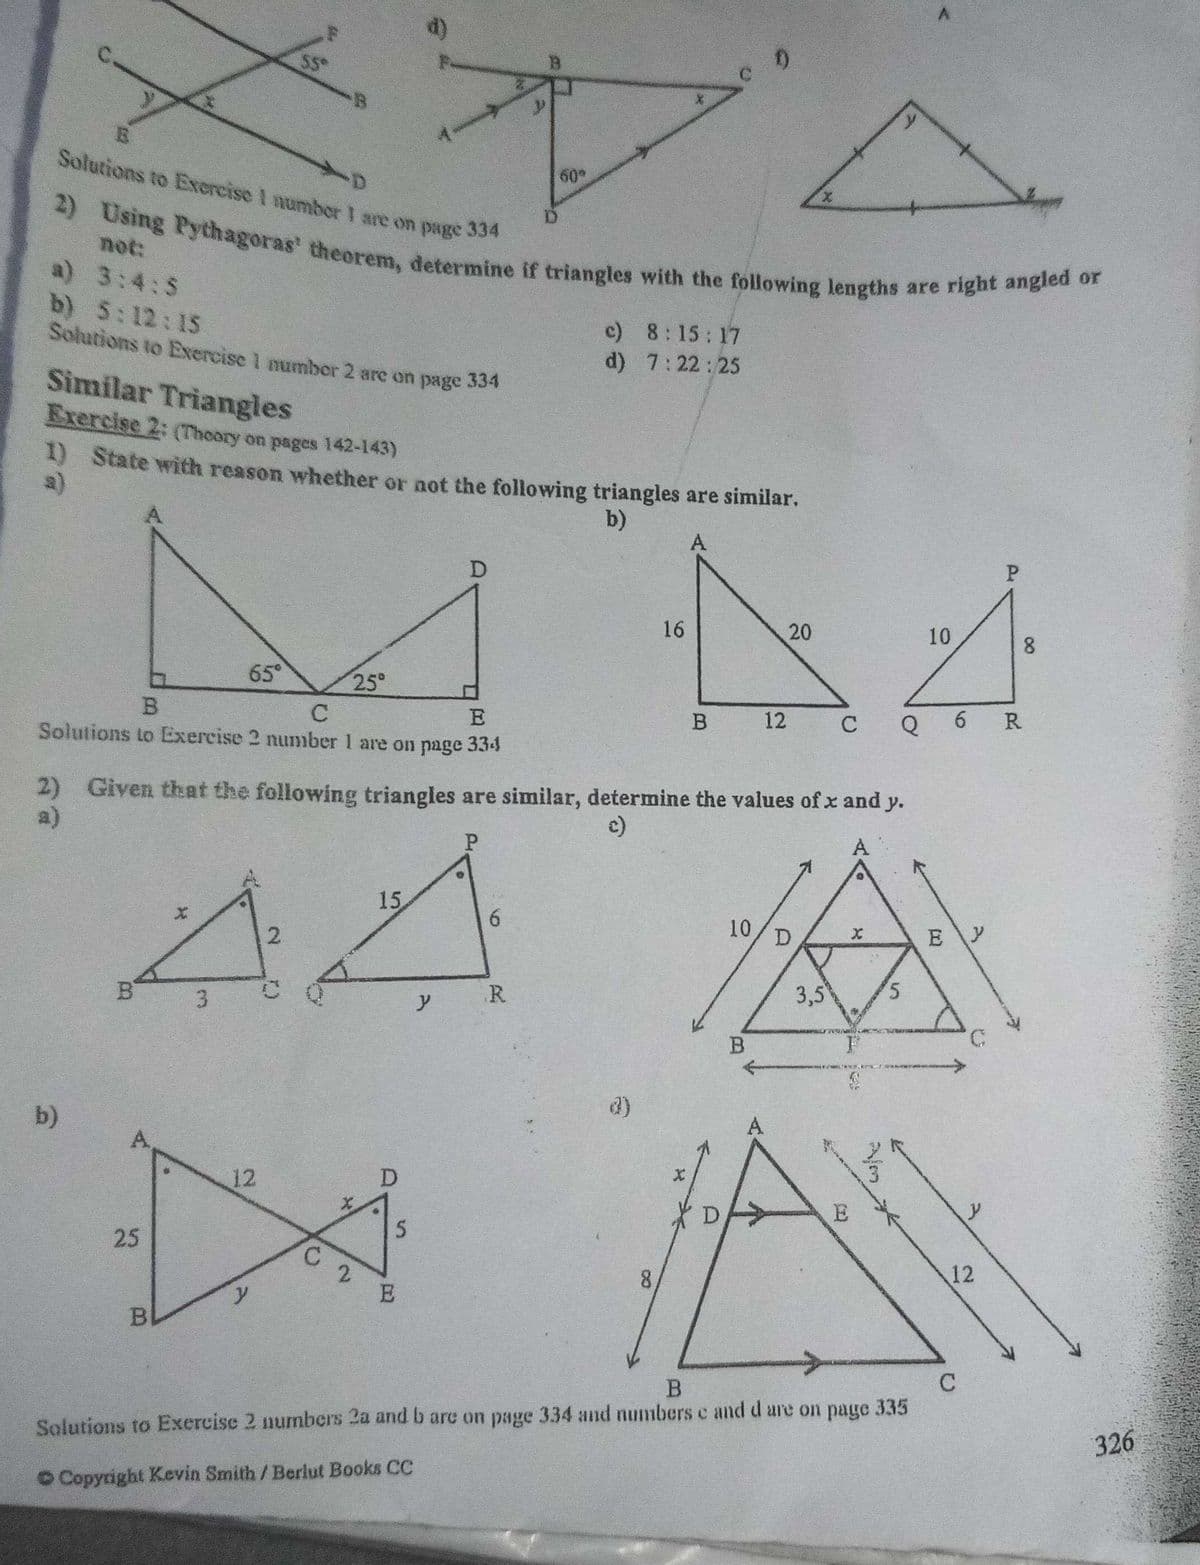 2) Using Pythagoras' theorem, determine if triangles with the following lengths are right angled or
S$*
B.
Solutions to Excrcise I numbor I are on page 334
60
2)
not:
a) 3:4:5
b) 5:12:15
Solutions to Exercise 1 number 2 arc on page 334
c) 8:15:17
d) 7:22:25
Similar Triangles
Exercise 2: (Thoory on pages 142-143)
1) State with reason whether or not the following triangles are similar.
a)
b)
A
P.
16
20
10
65°
25°
R
E
12
C
Q
Solutions to Exercise 2 number 1 are on page 334
2) Given that the following triangles are similar, determine the values of x and y.
a)
c)
A
15
6.
10
2.
3,5
5.
R.
3
B.
b)
A
A,
12
5
25
12
8.
2.
E
y
C
326
Solutions to Exercise 2 numbers 2a and b arc on page 334 and numbers c and d are on page 335
O Copyright Kevin Smith/Berlut Books CC
